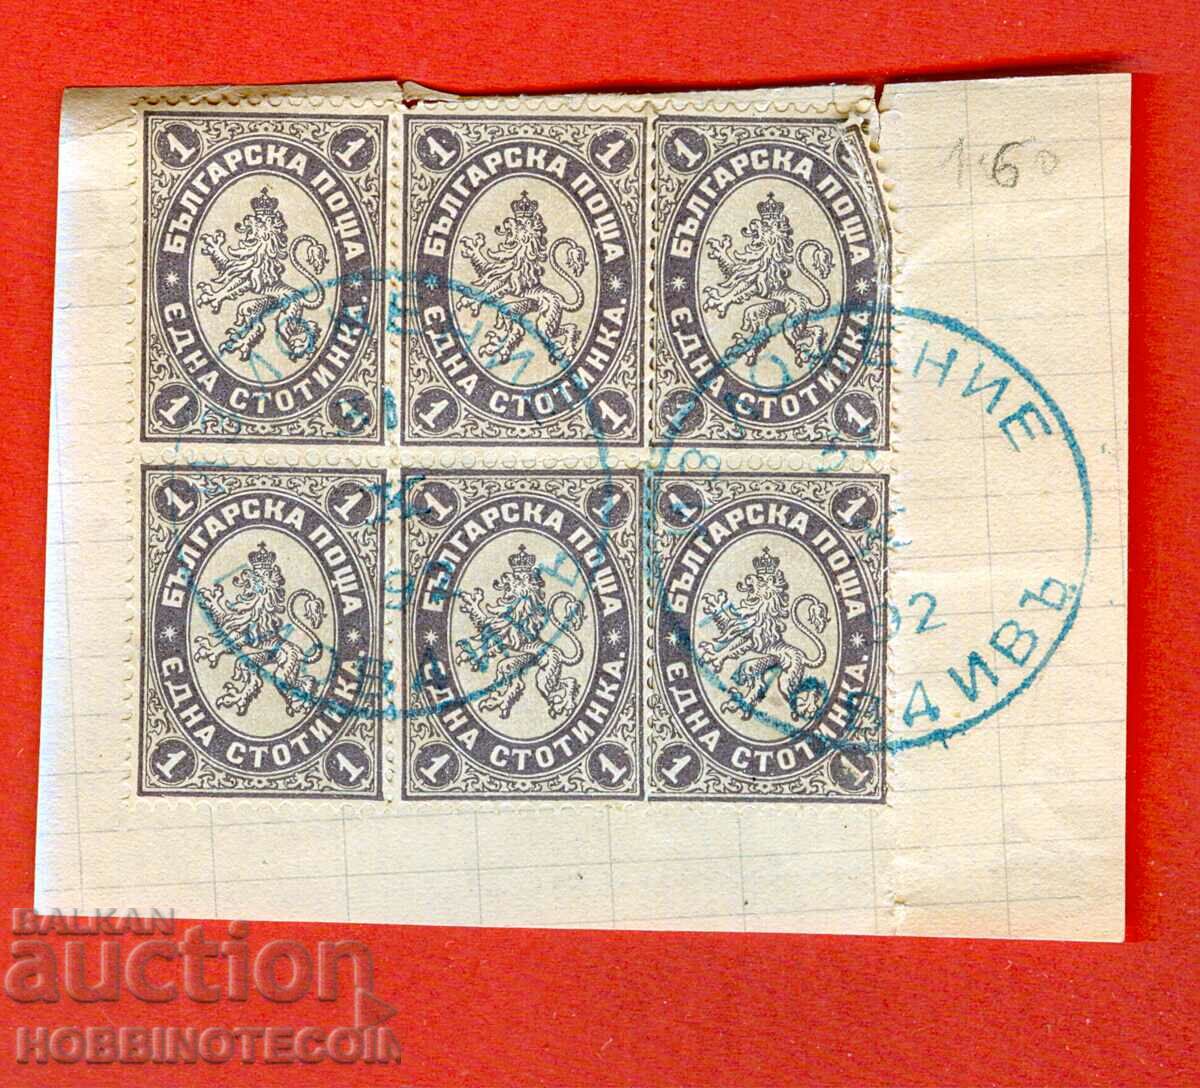 LARGE LION 6 x 1 Cent stamp EXHIBITION PLOVDIV 31 X 1892